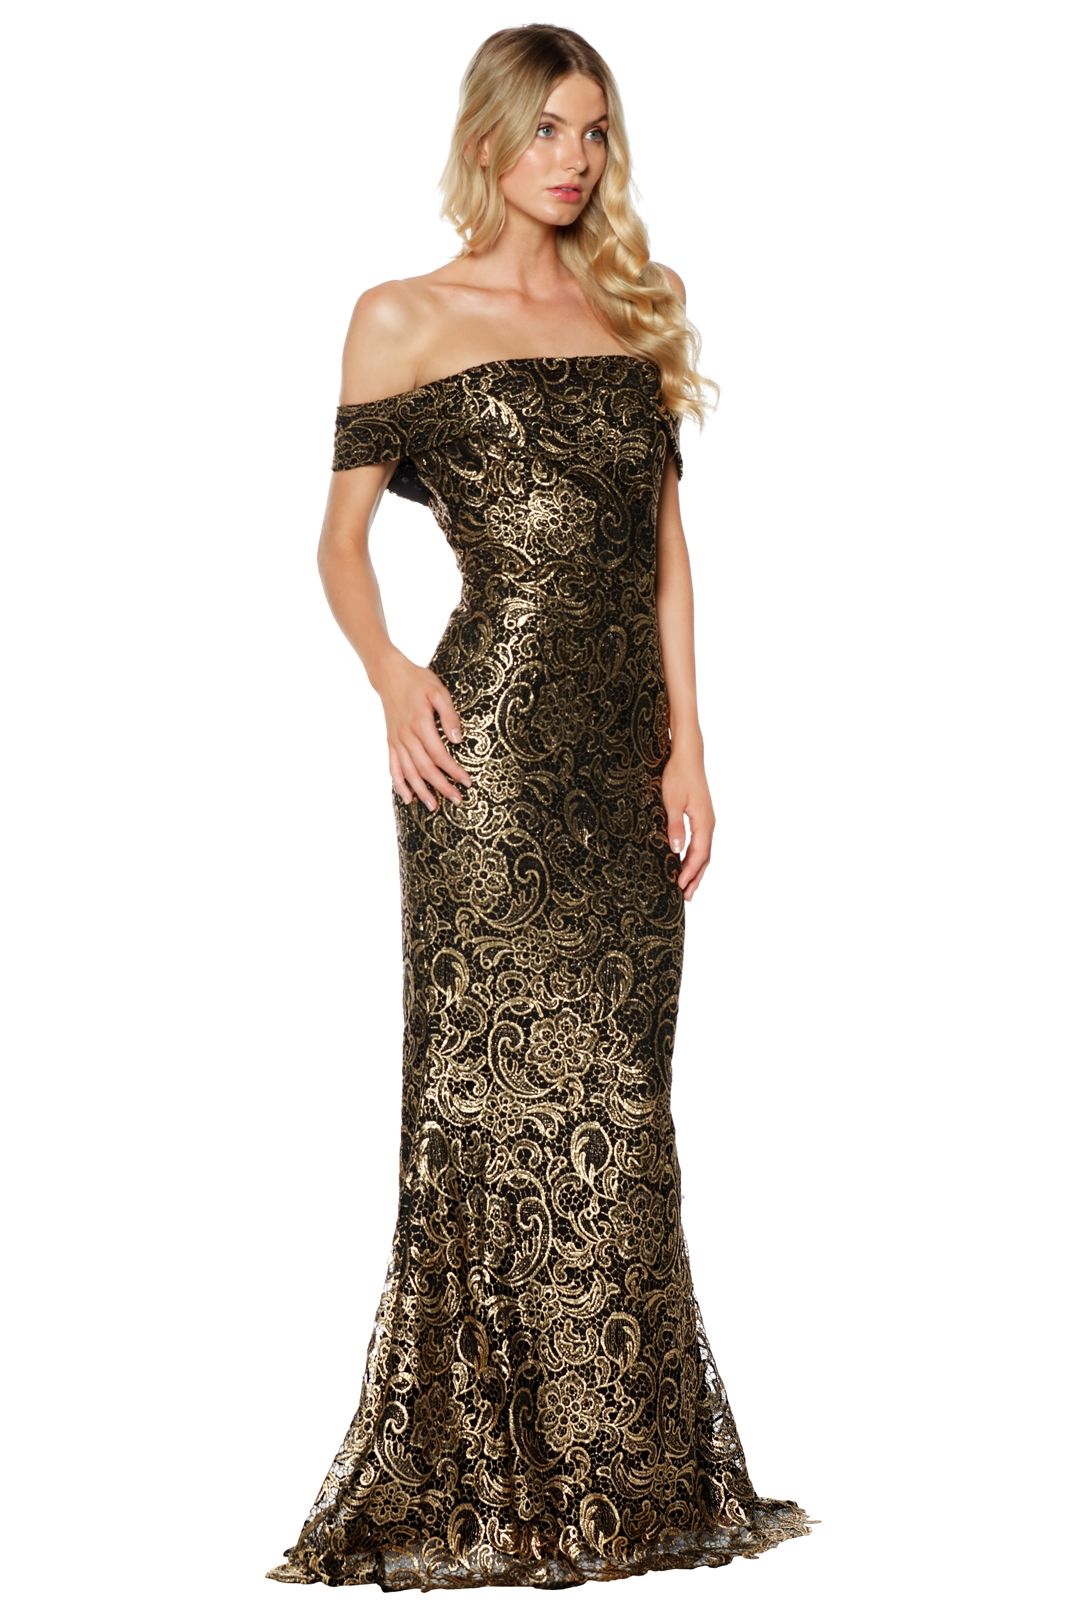 Grace and Hart - Gold Rush Off the Shoulder Gown - Gold - Side